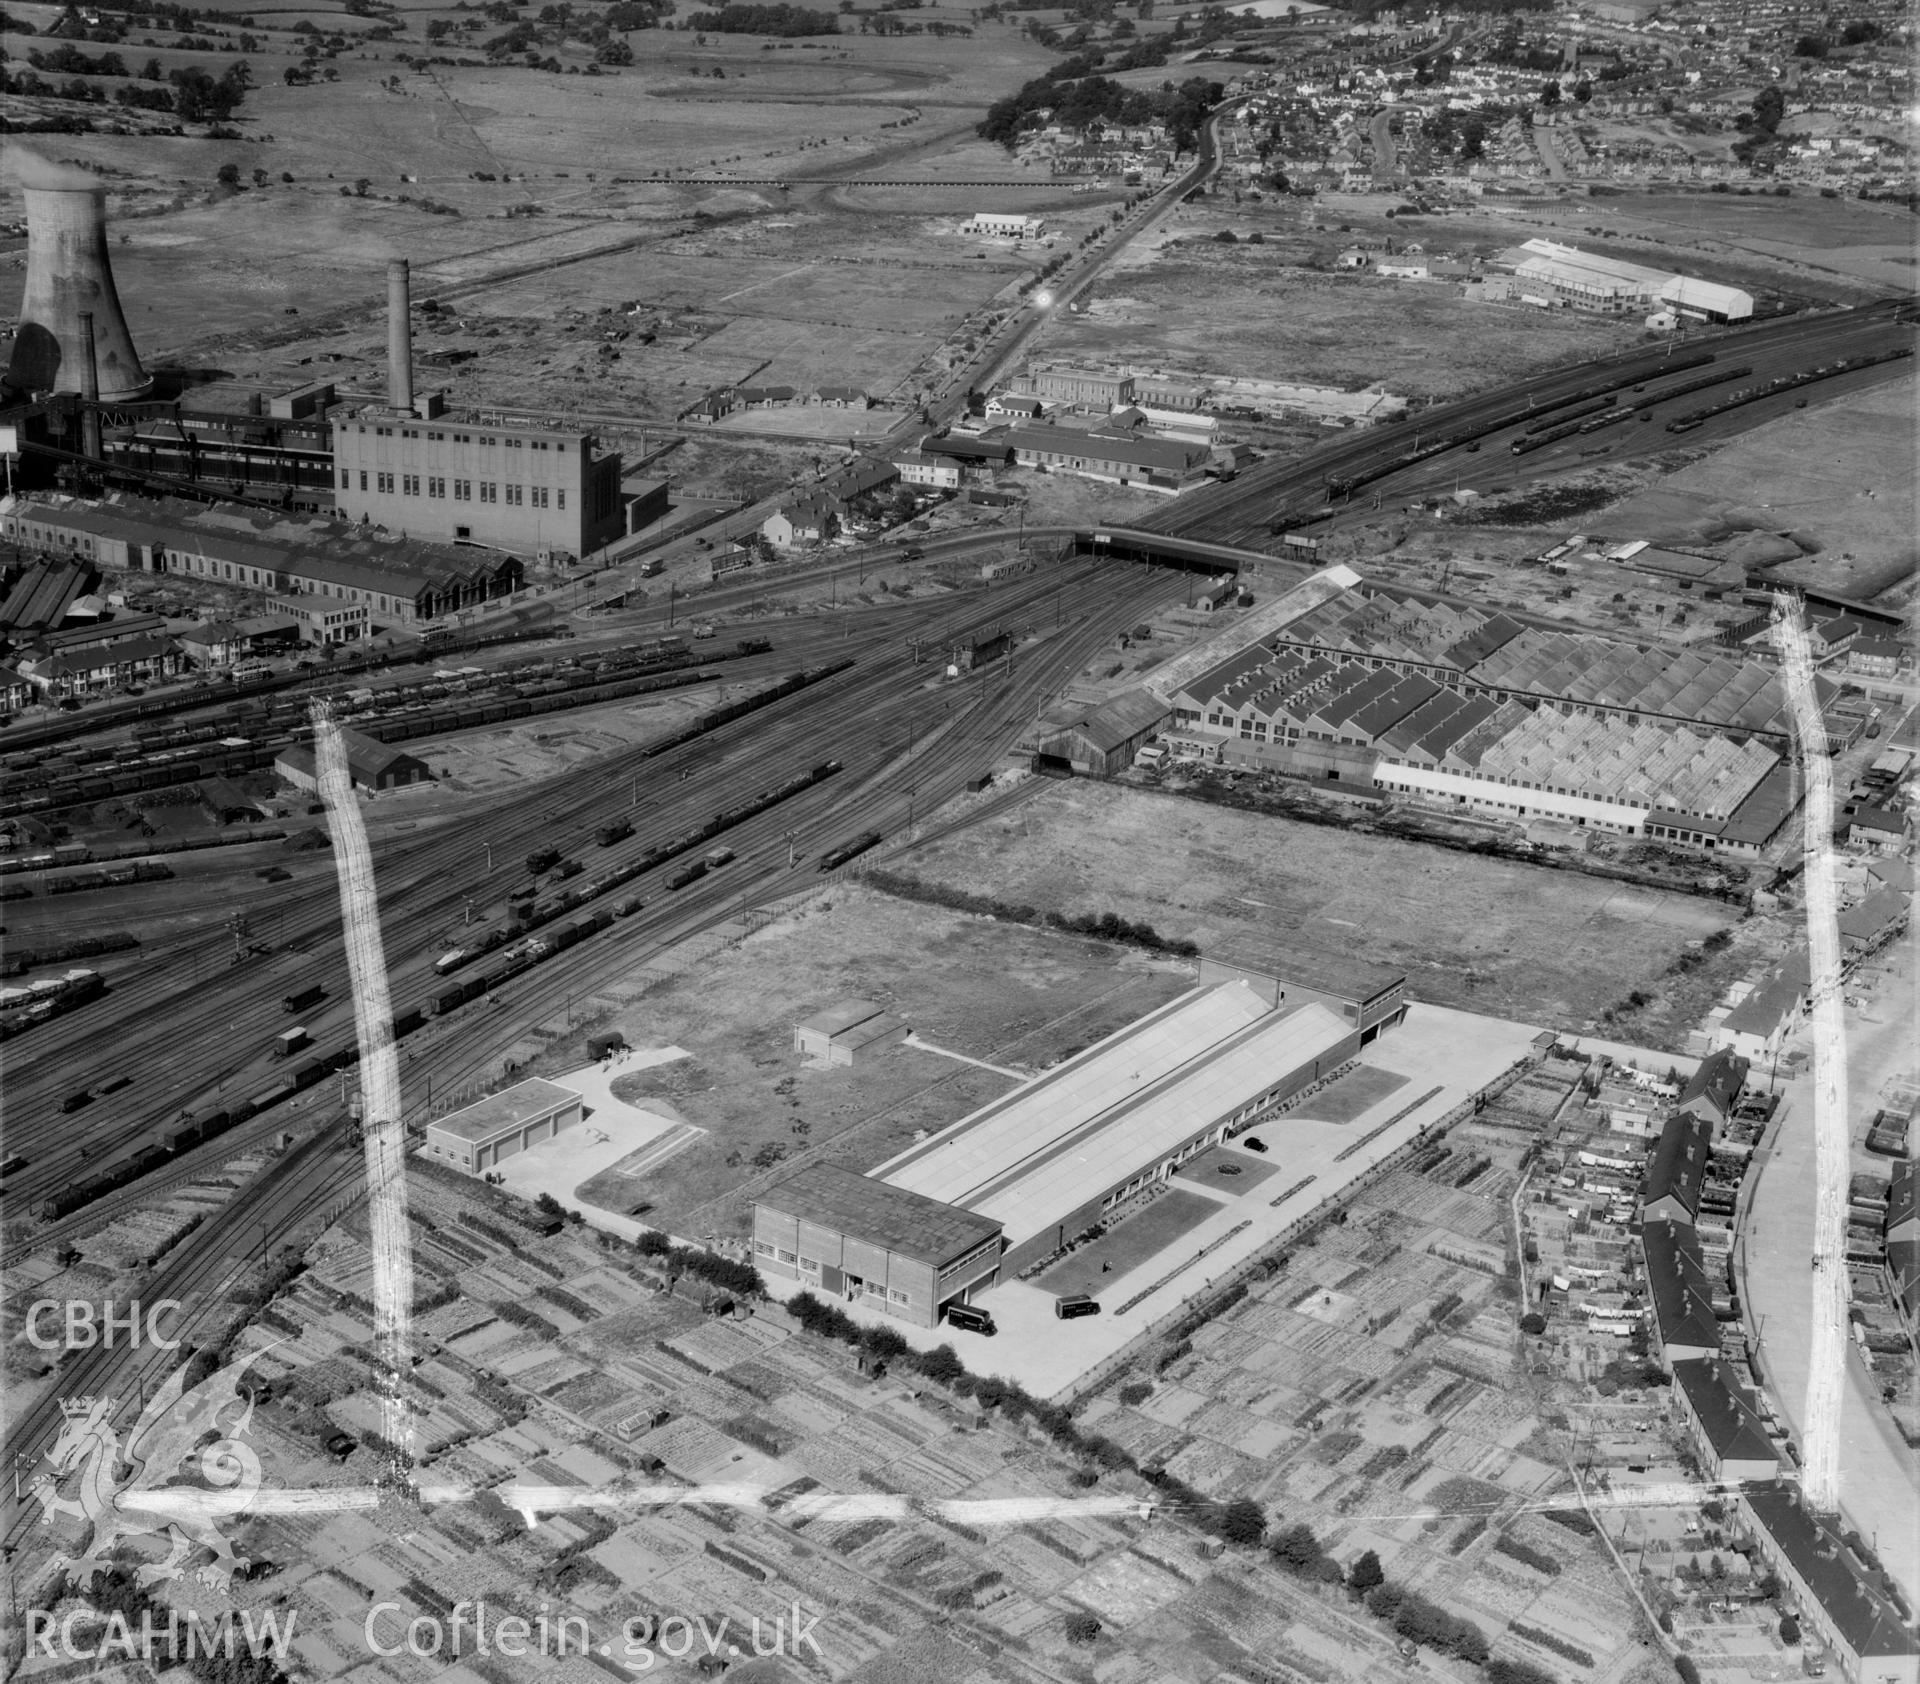 View of F.E. Fox biscuit factory, Cardiff, showing power station in background